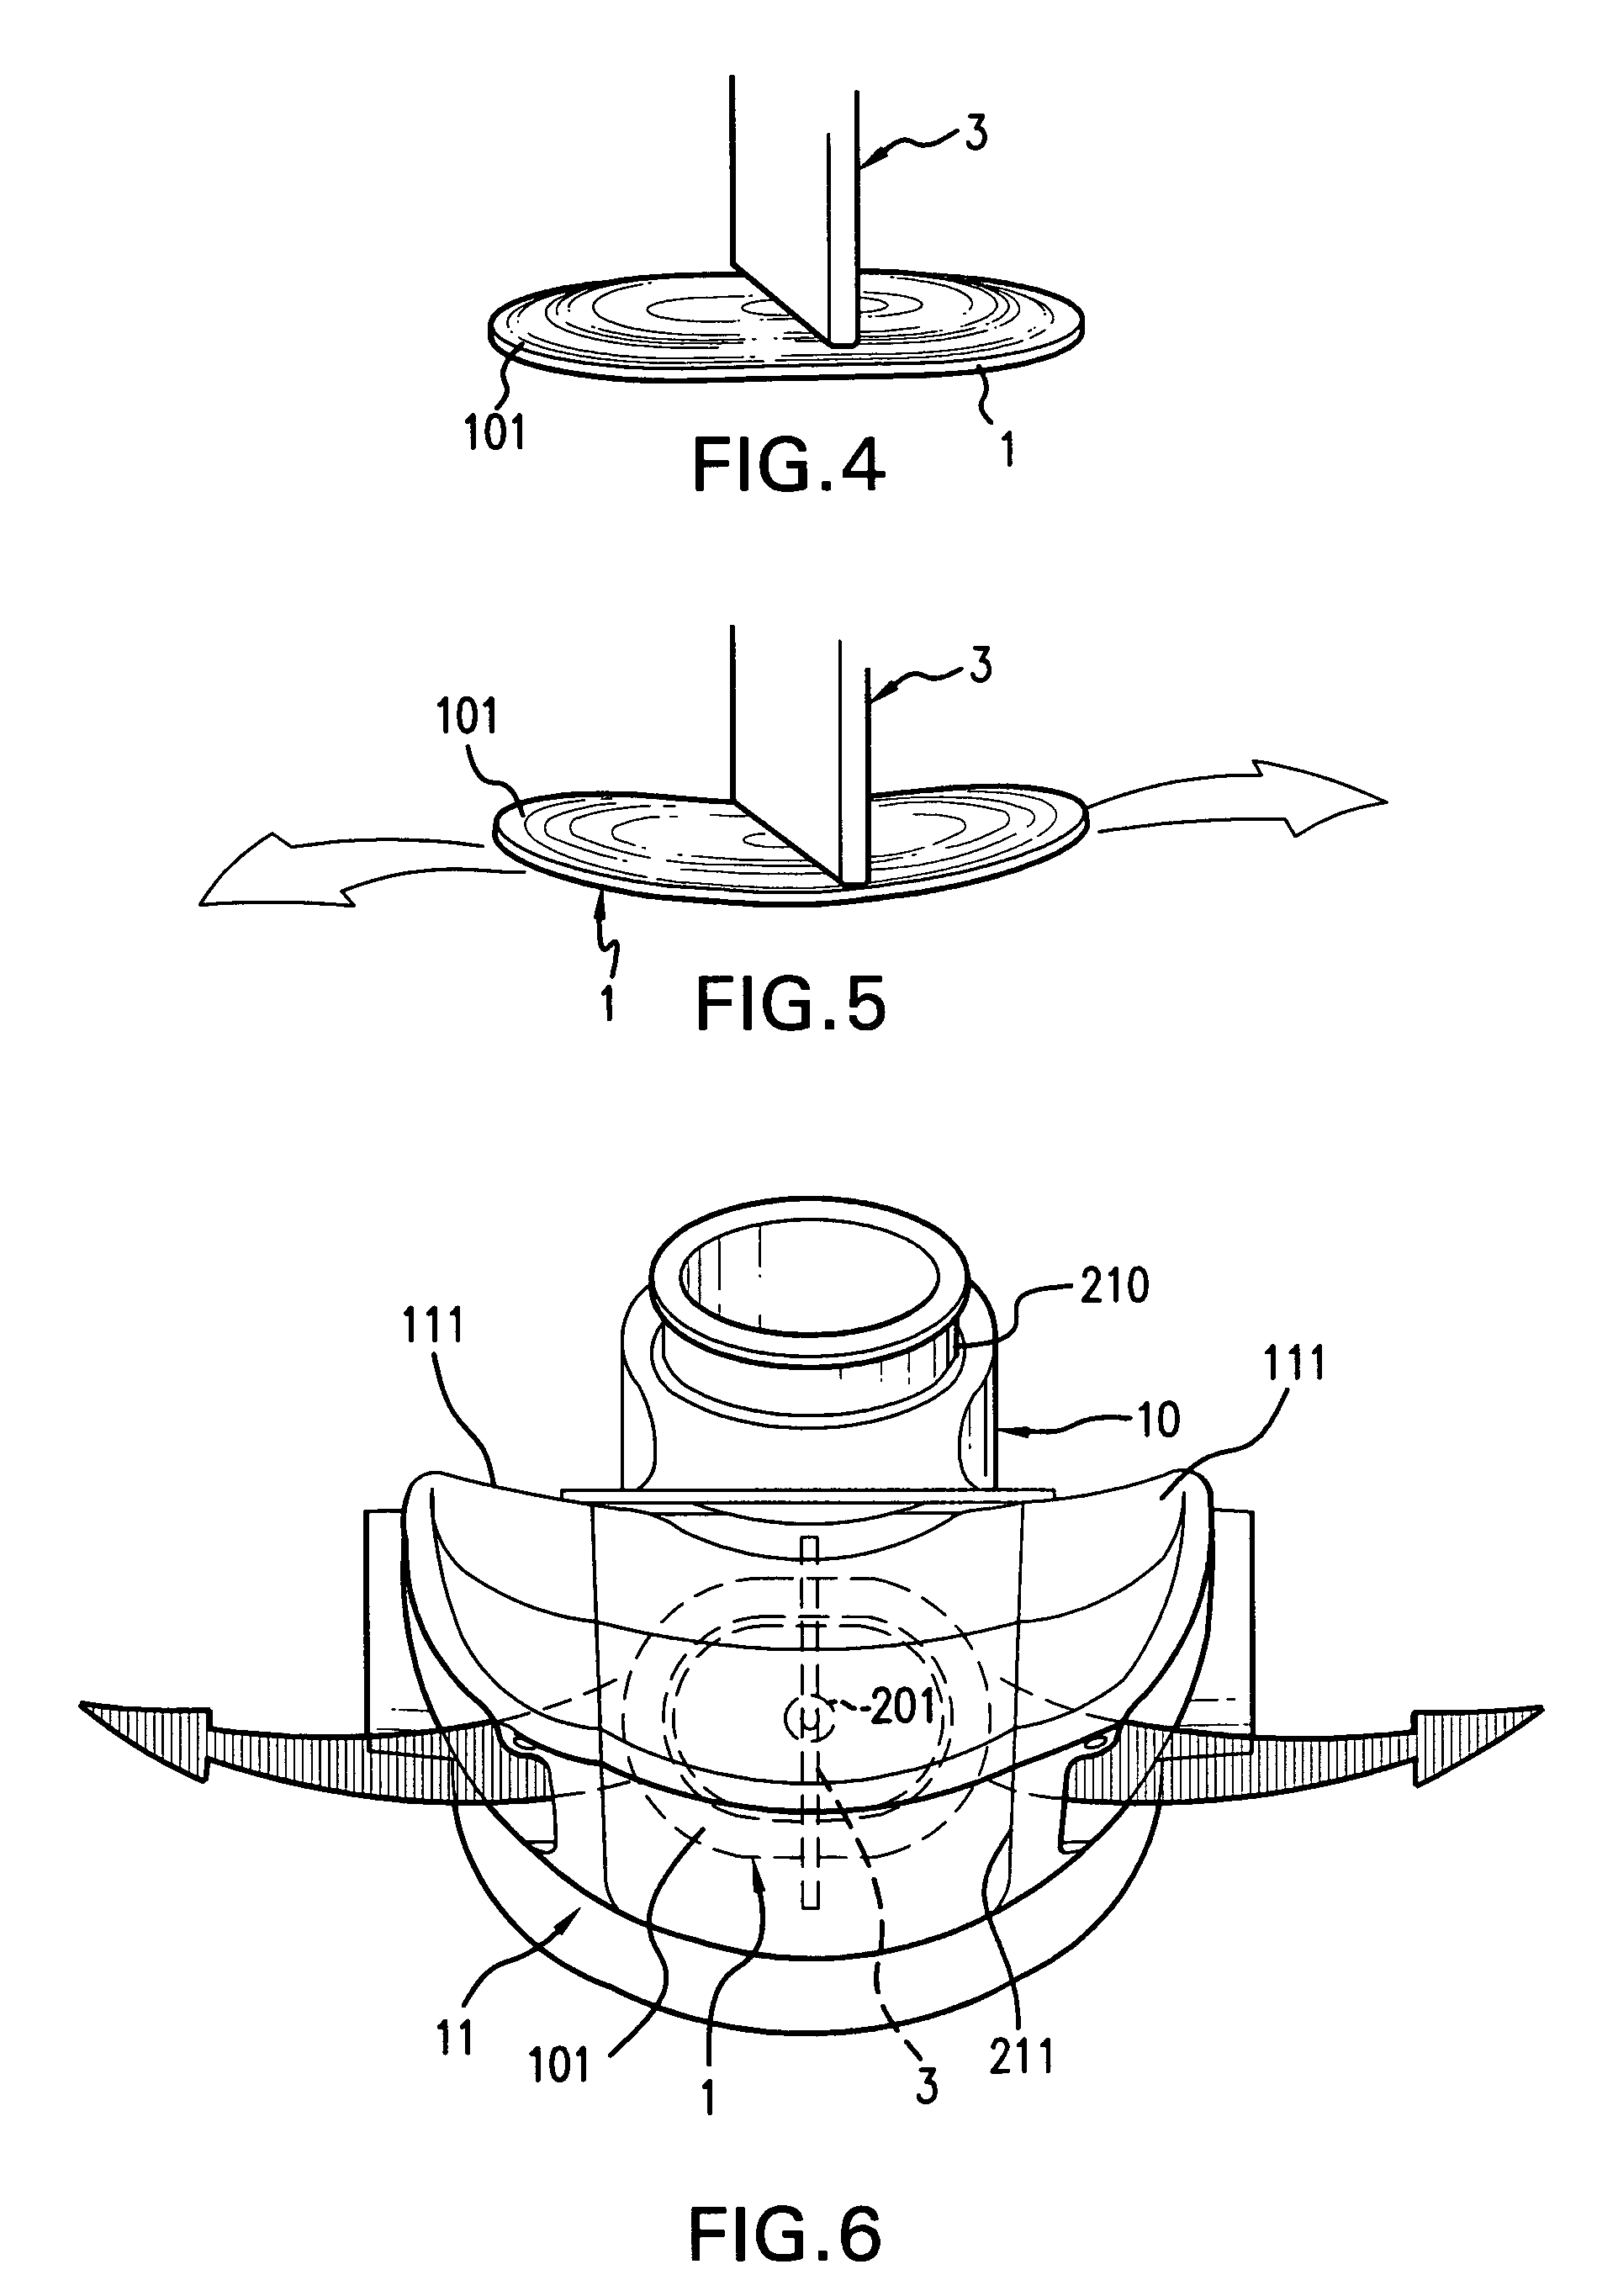 Membrane valve and second stage pressure reducer for two-stage underwater regulators incorporating said valve